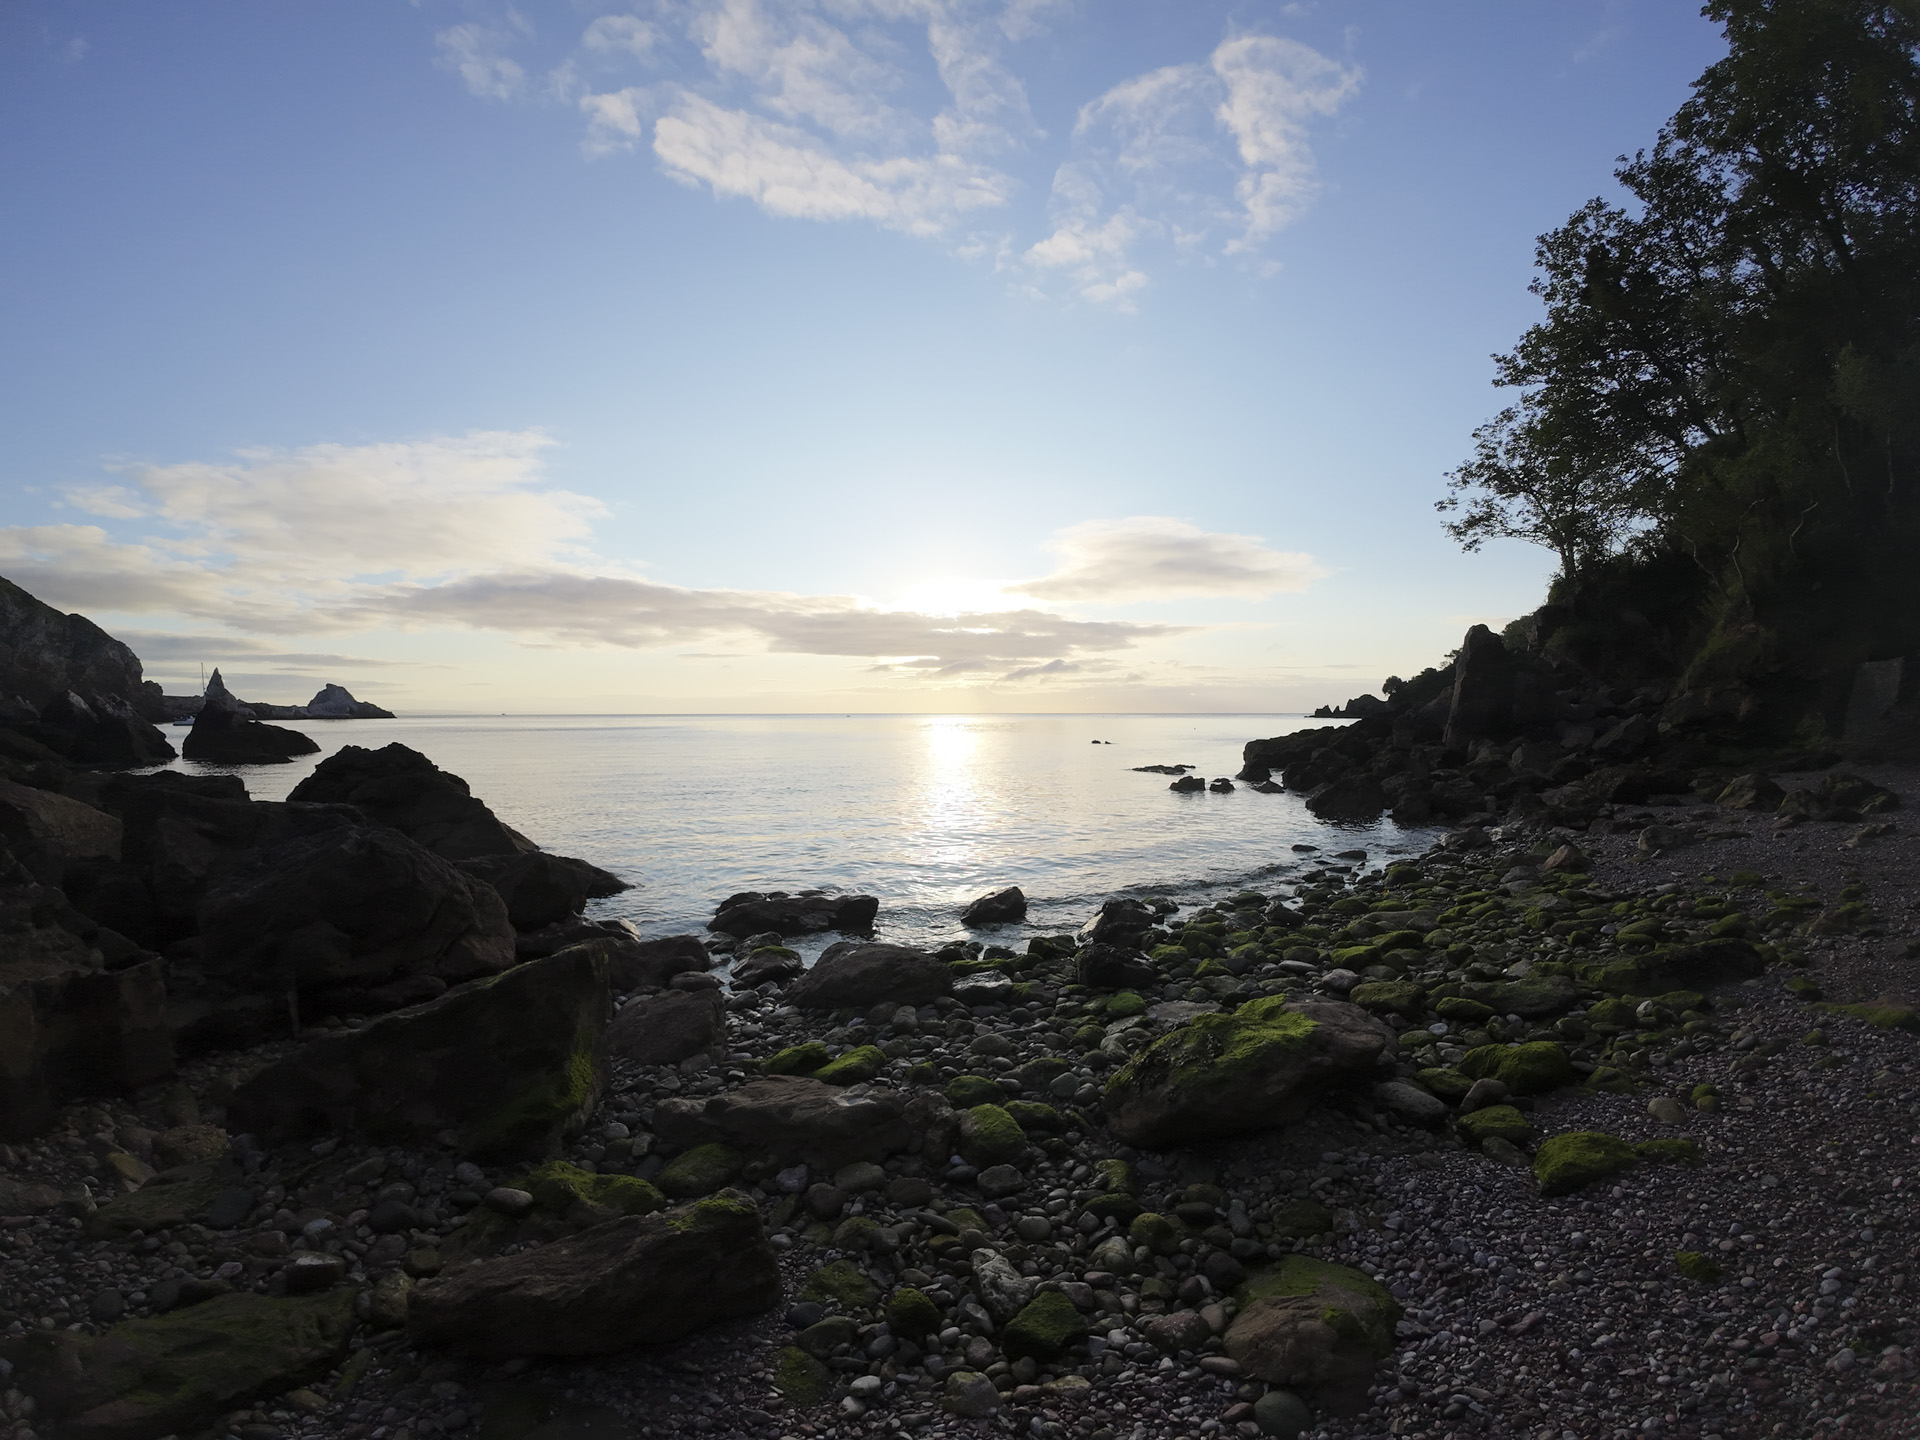 Early morning on a rocky beach with sunrise and calm seas